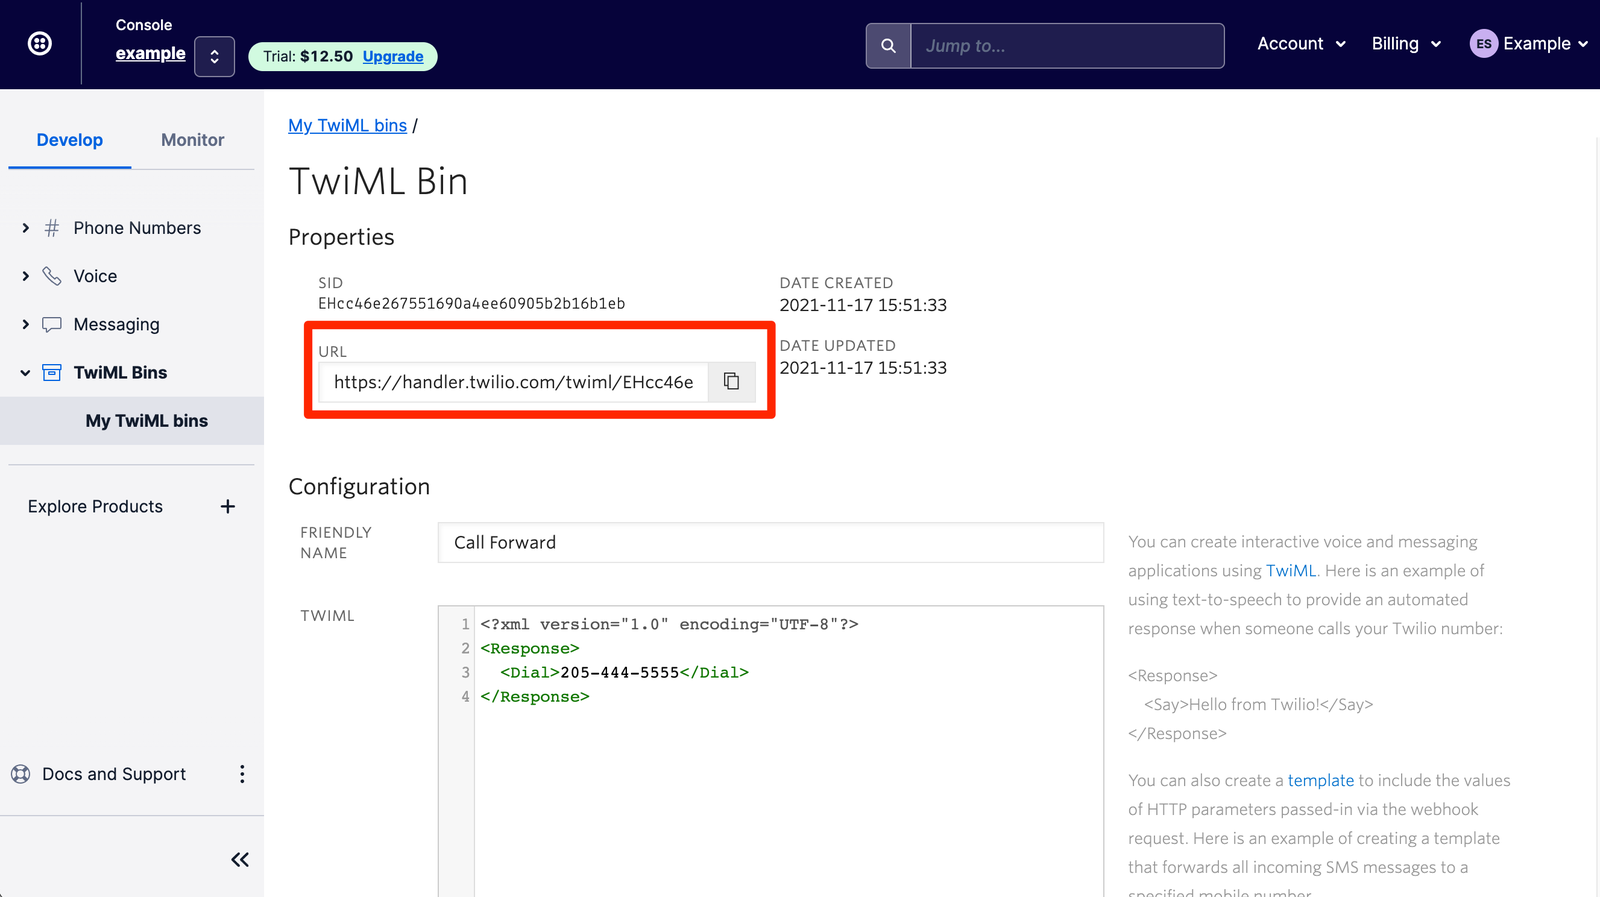 Where to copy the URL of your TwiML Bin.